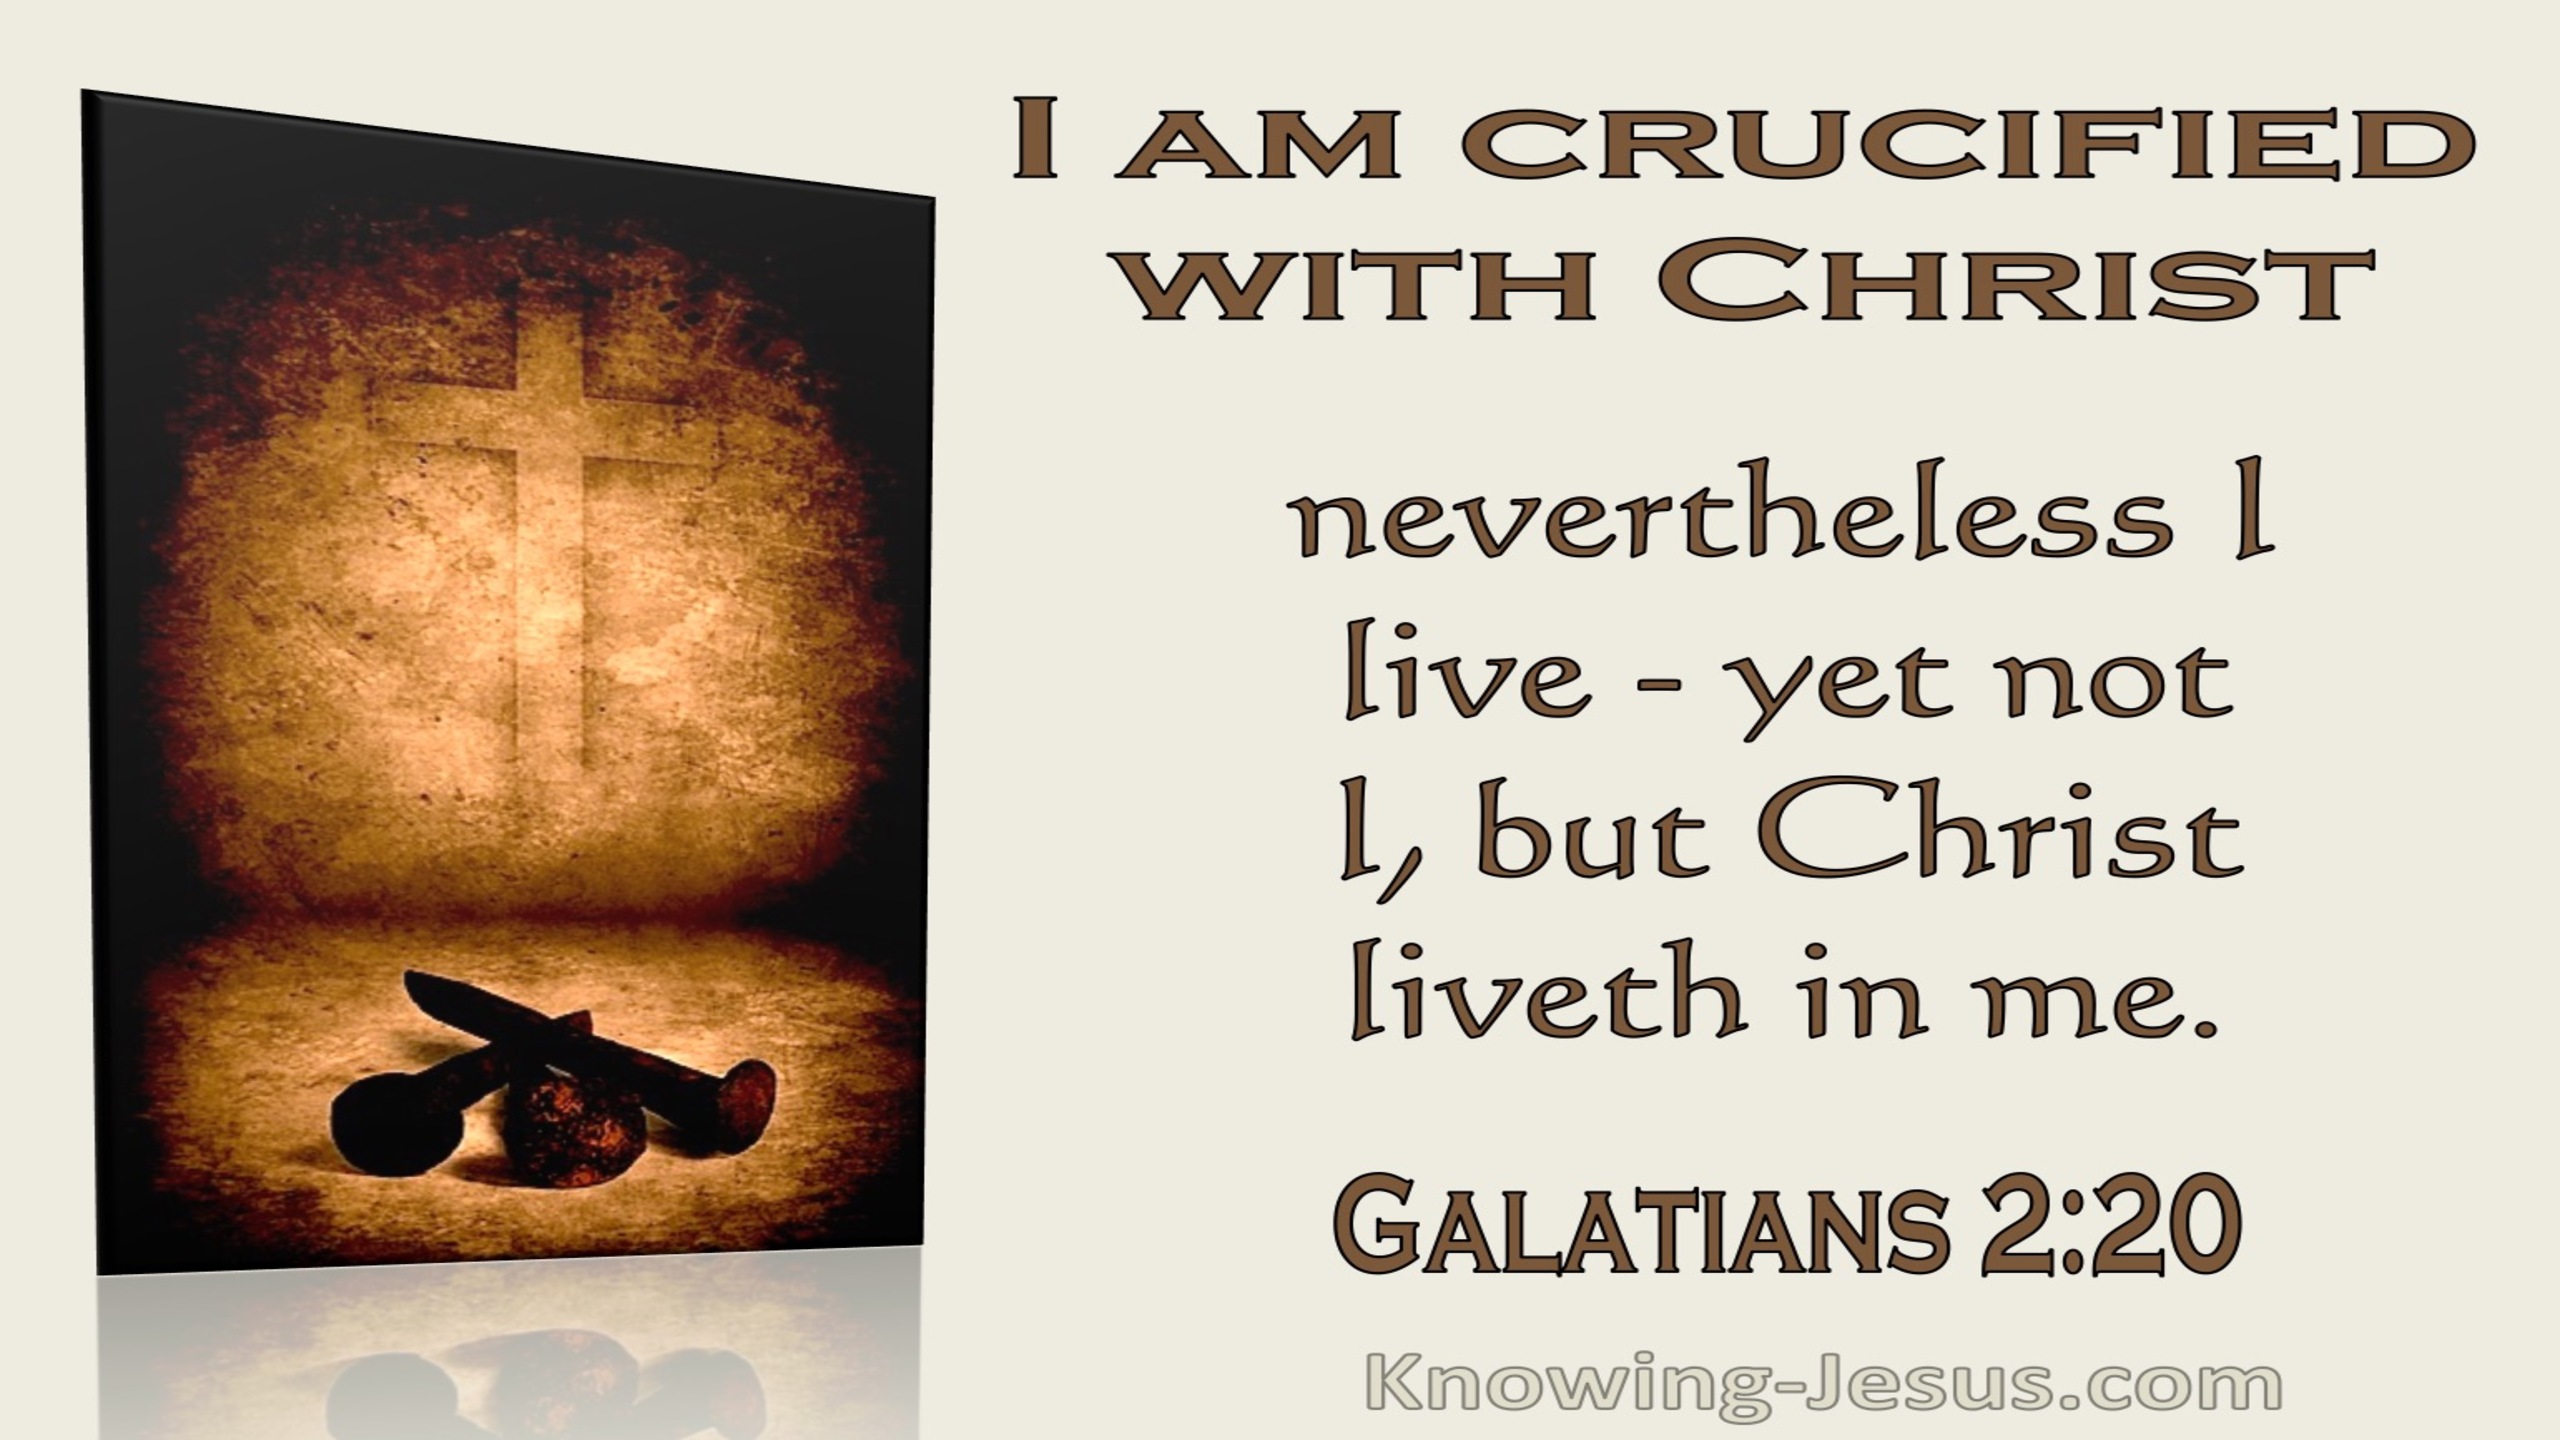 Galatians 2:20 Crucified With Christ (utmost)11:03